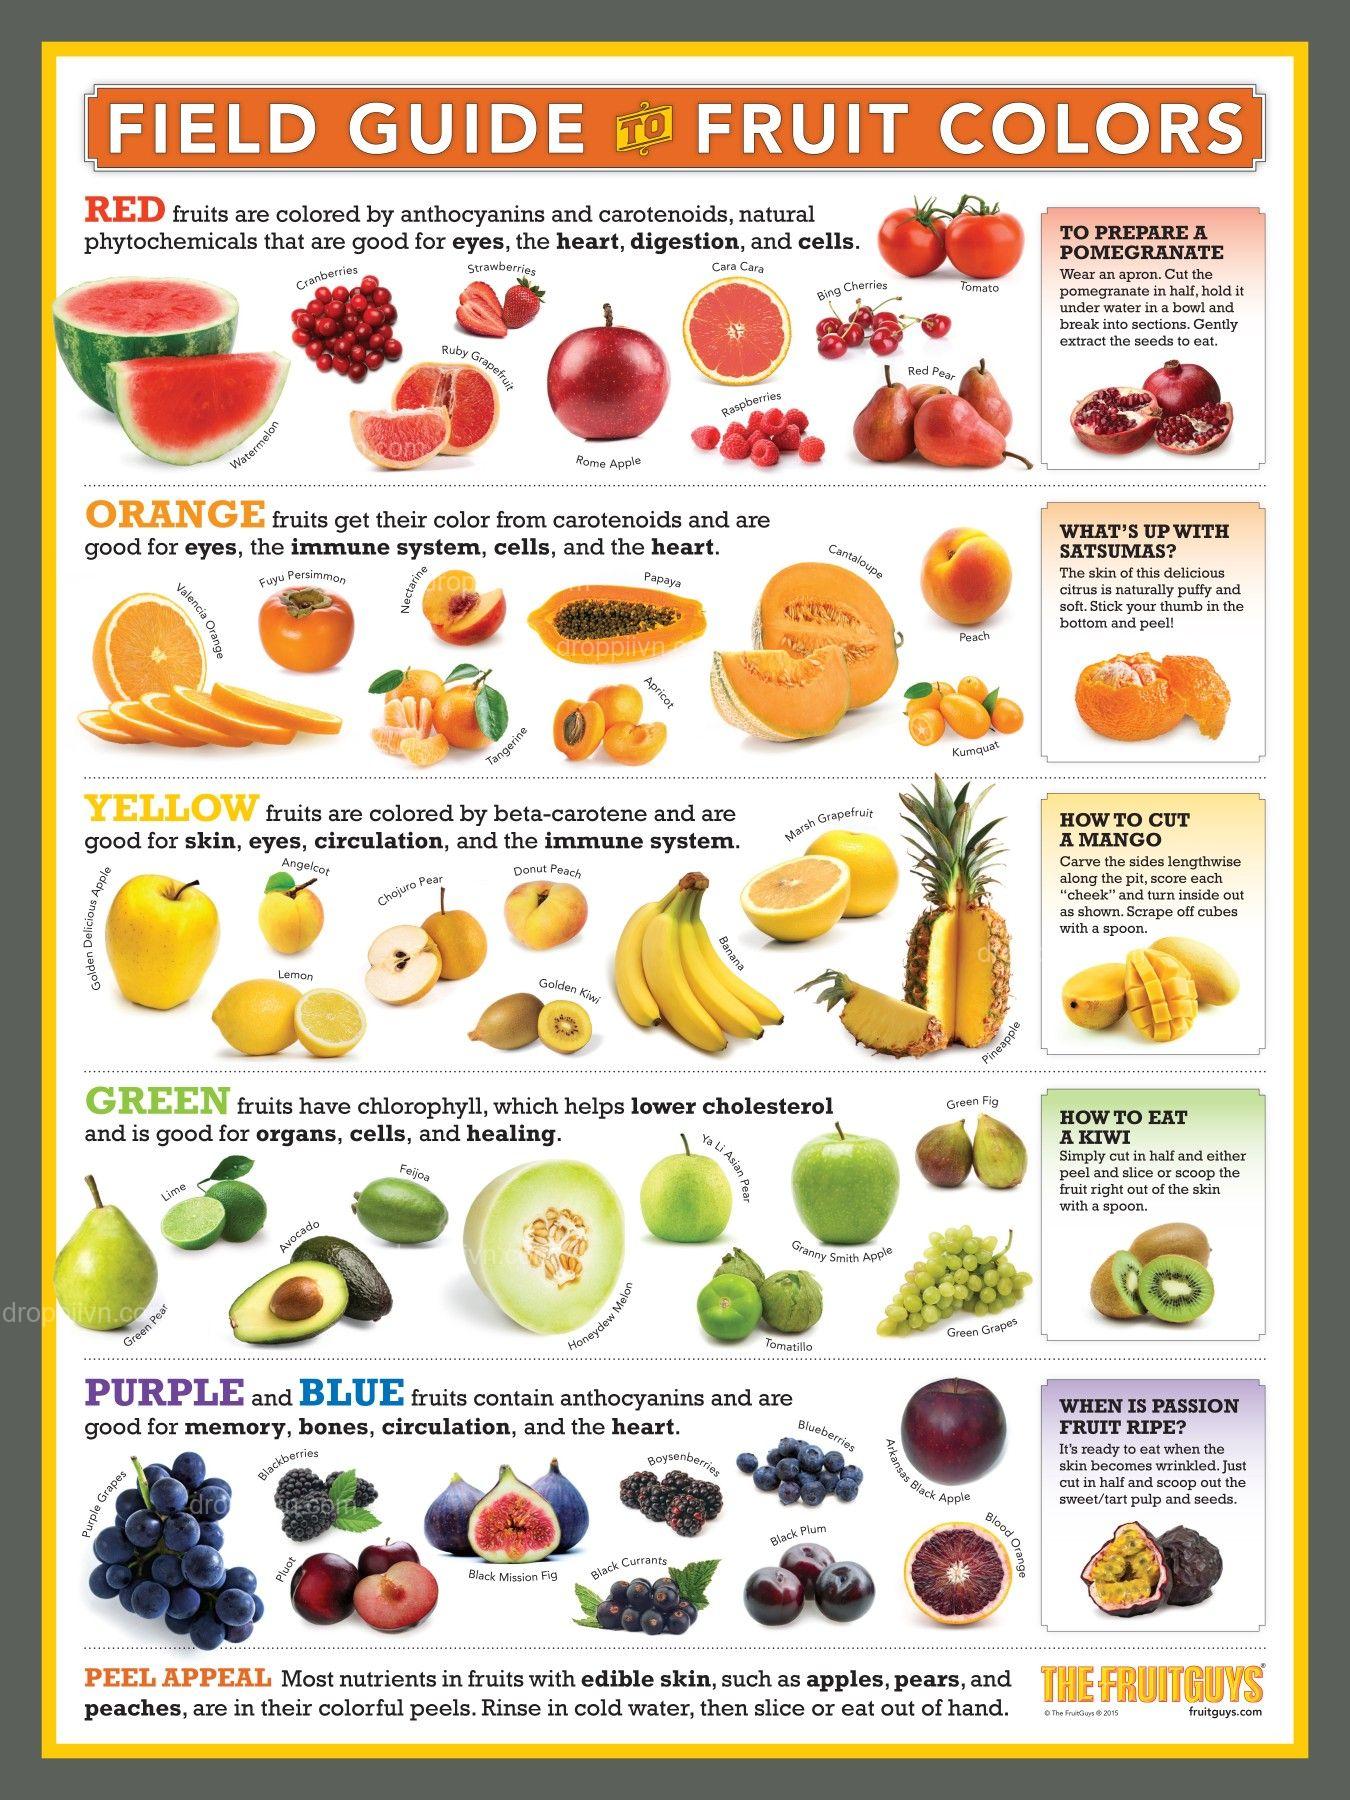 A guide to the nutritional makeup of various fruits and vegetables